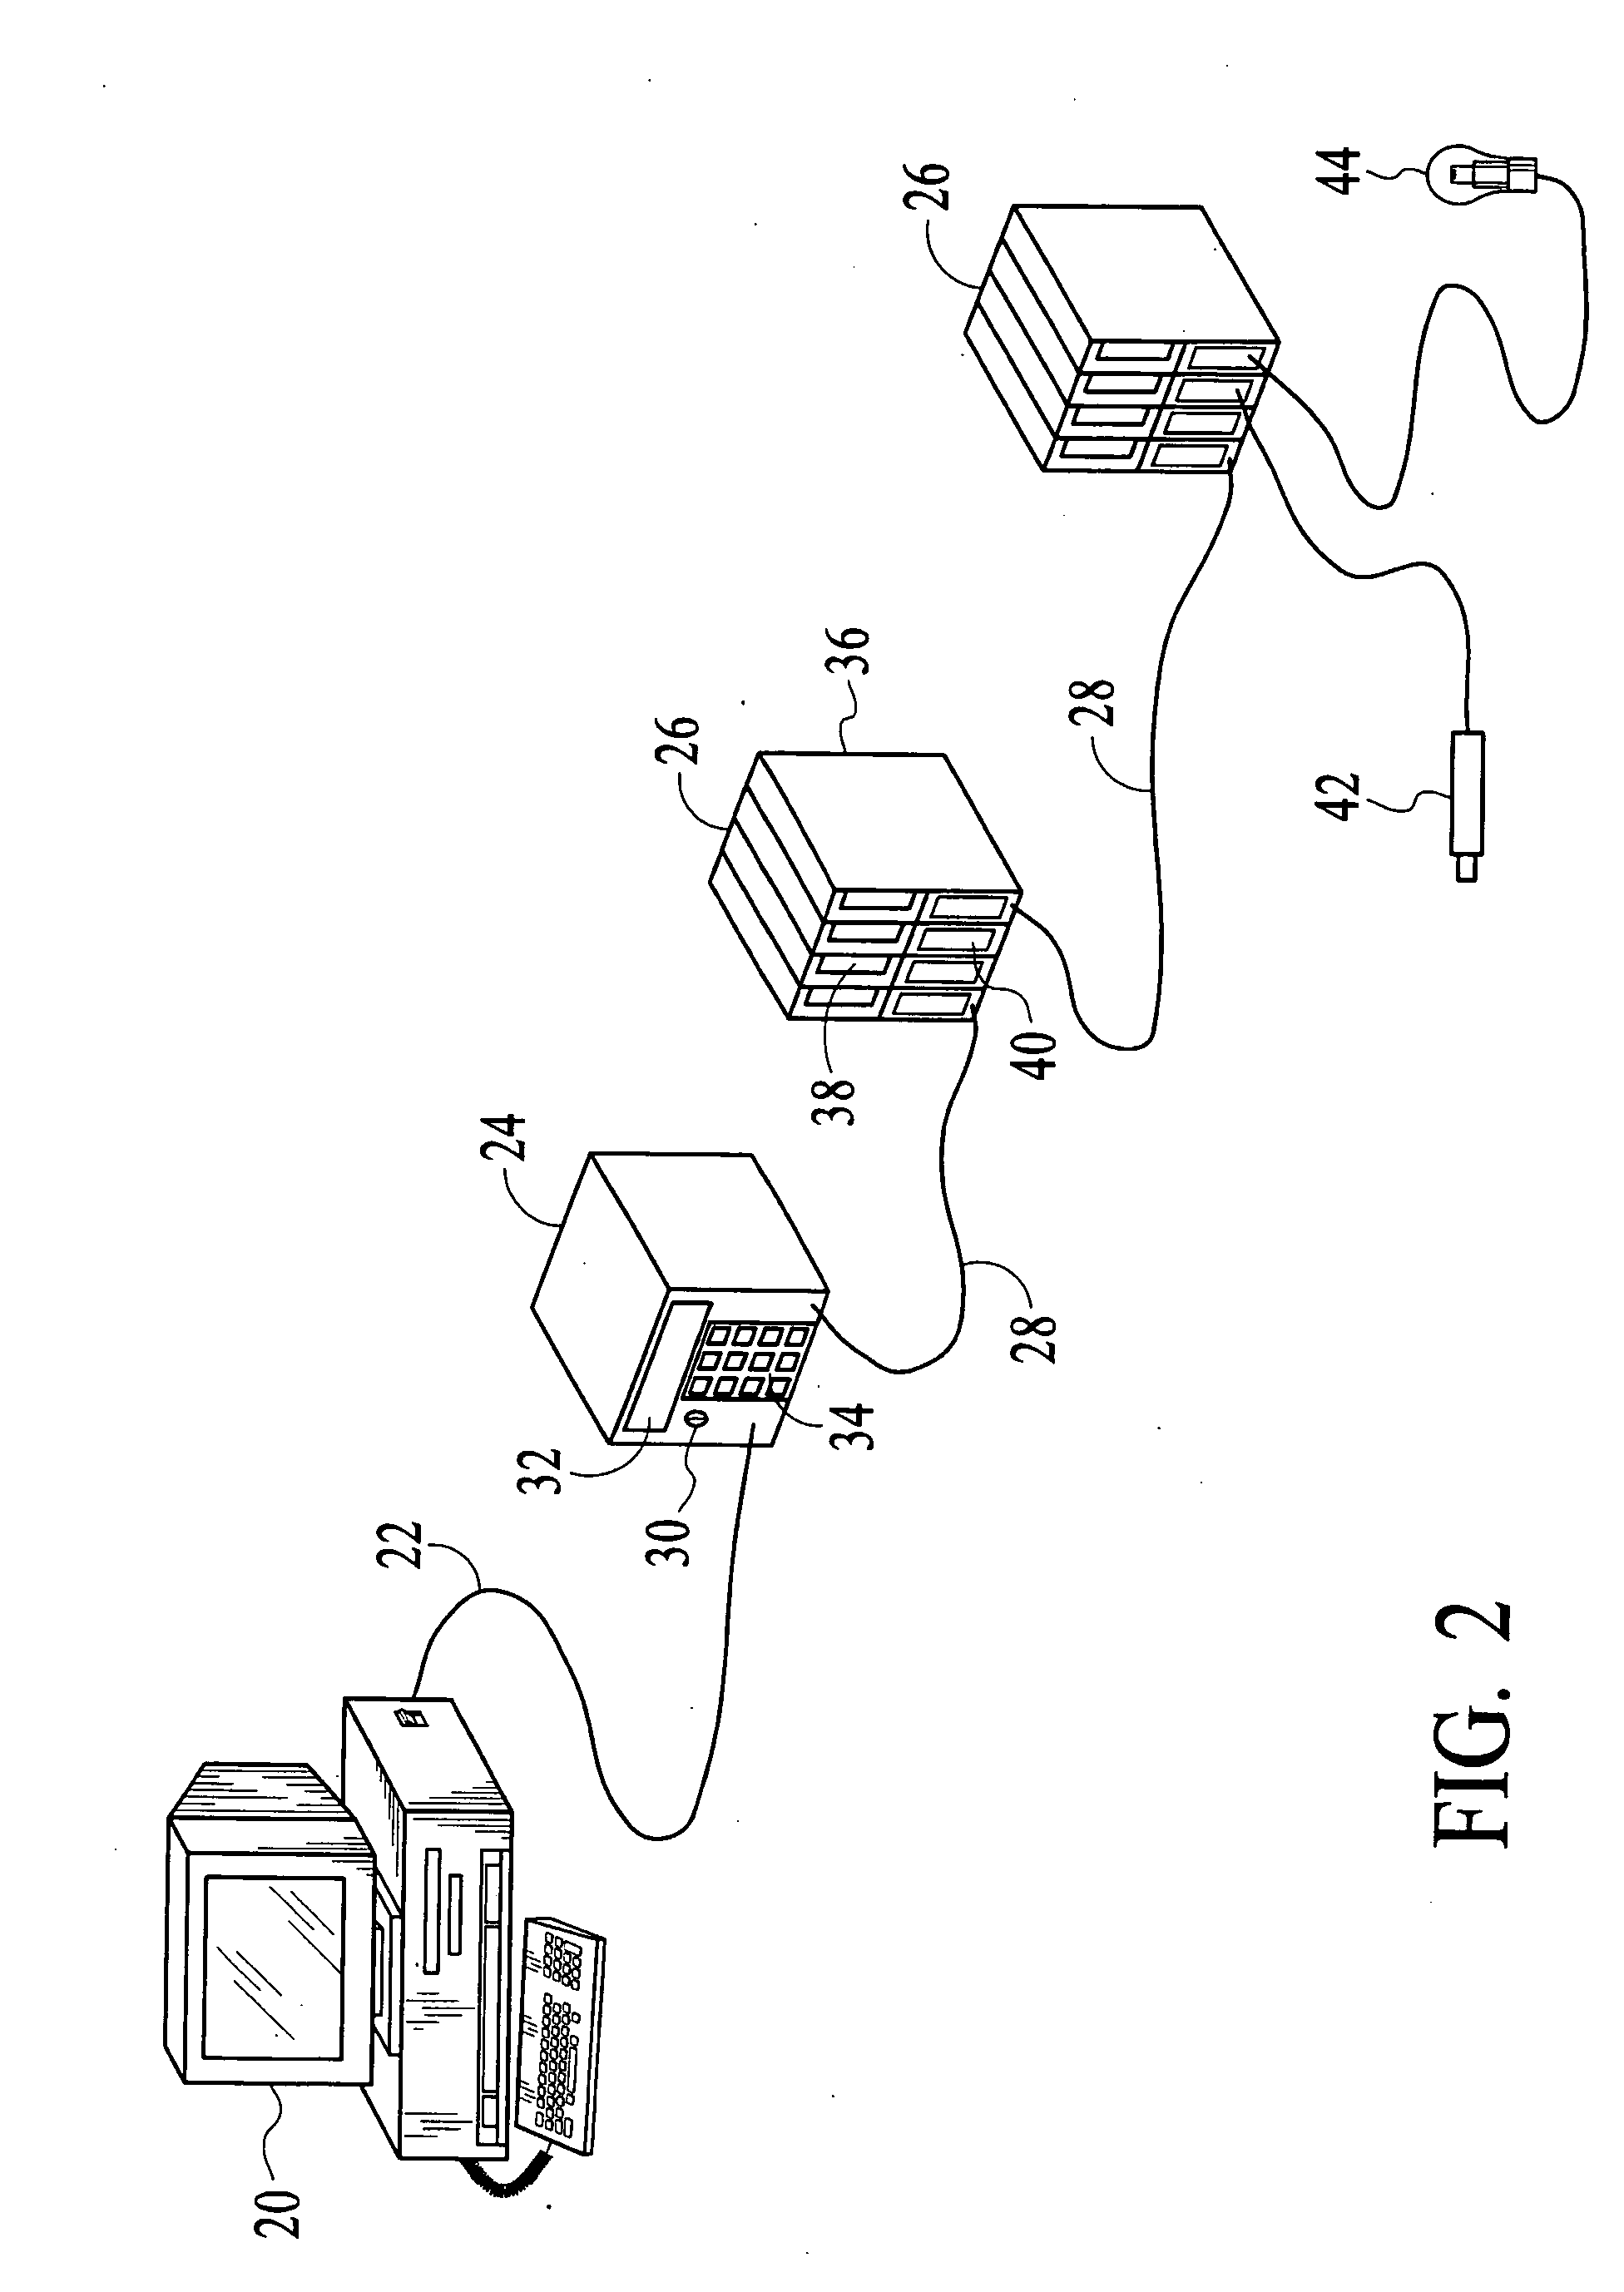 Distributed input/output control systems and methods